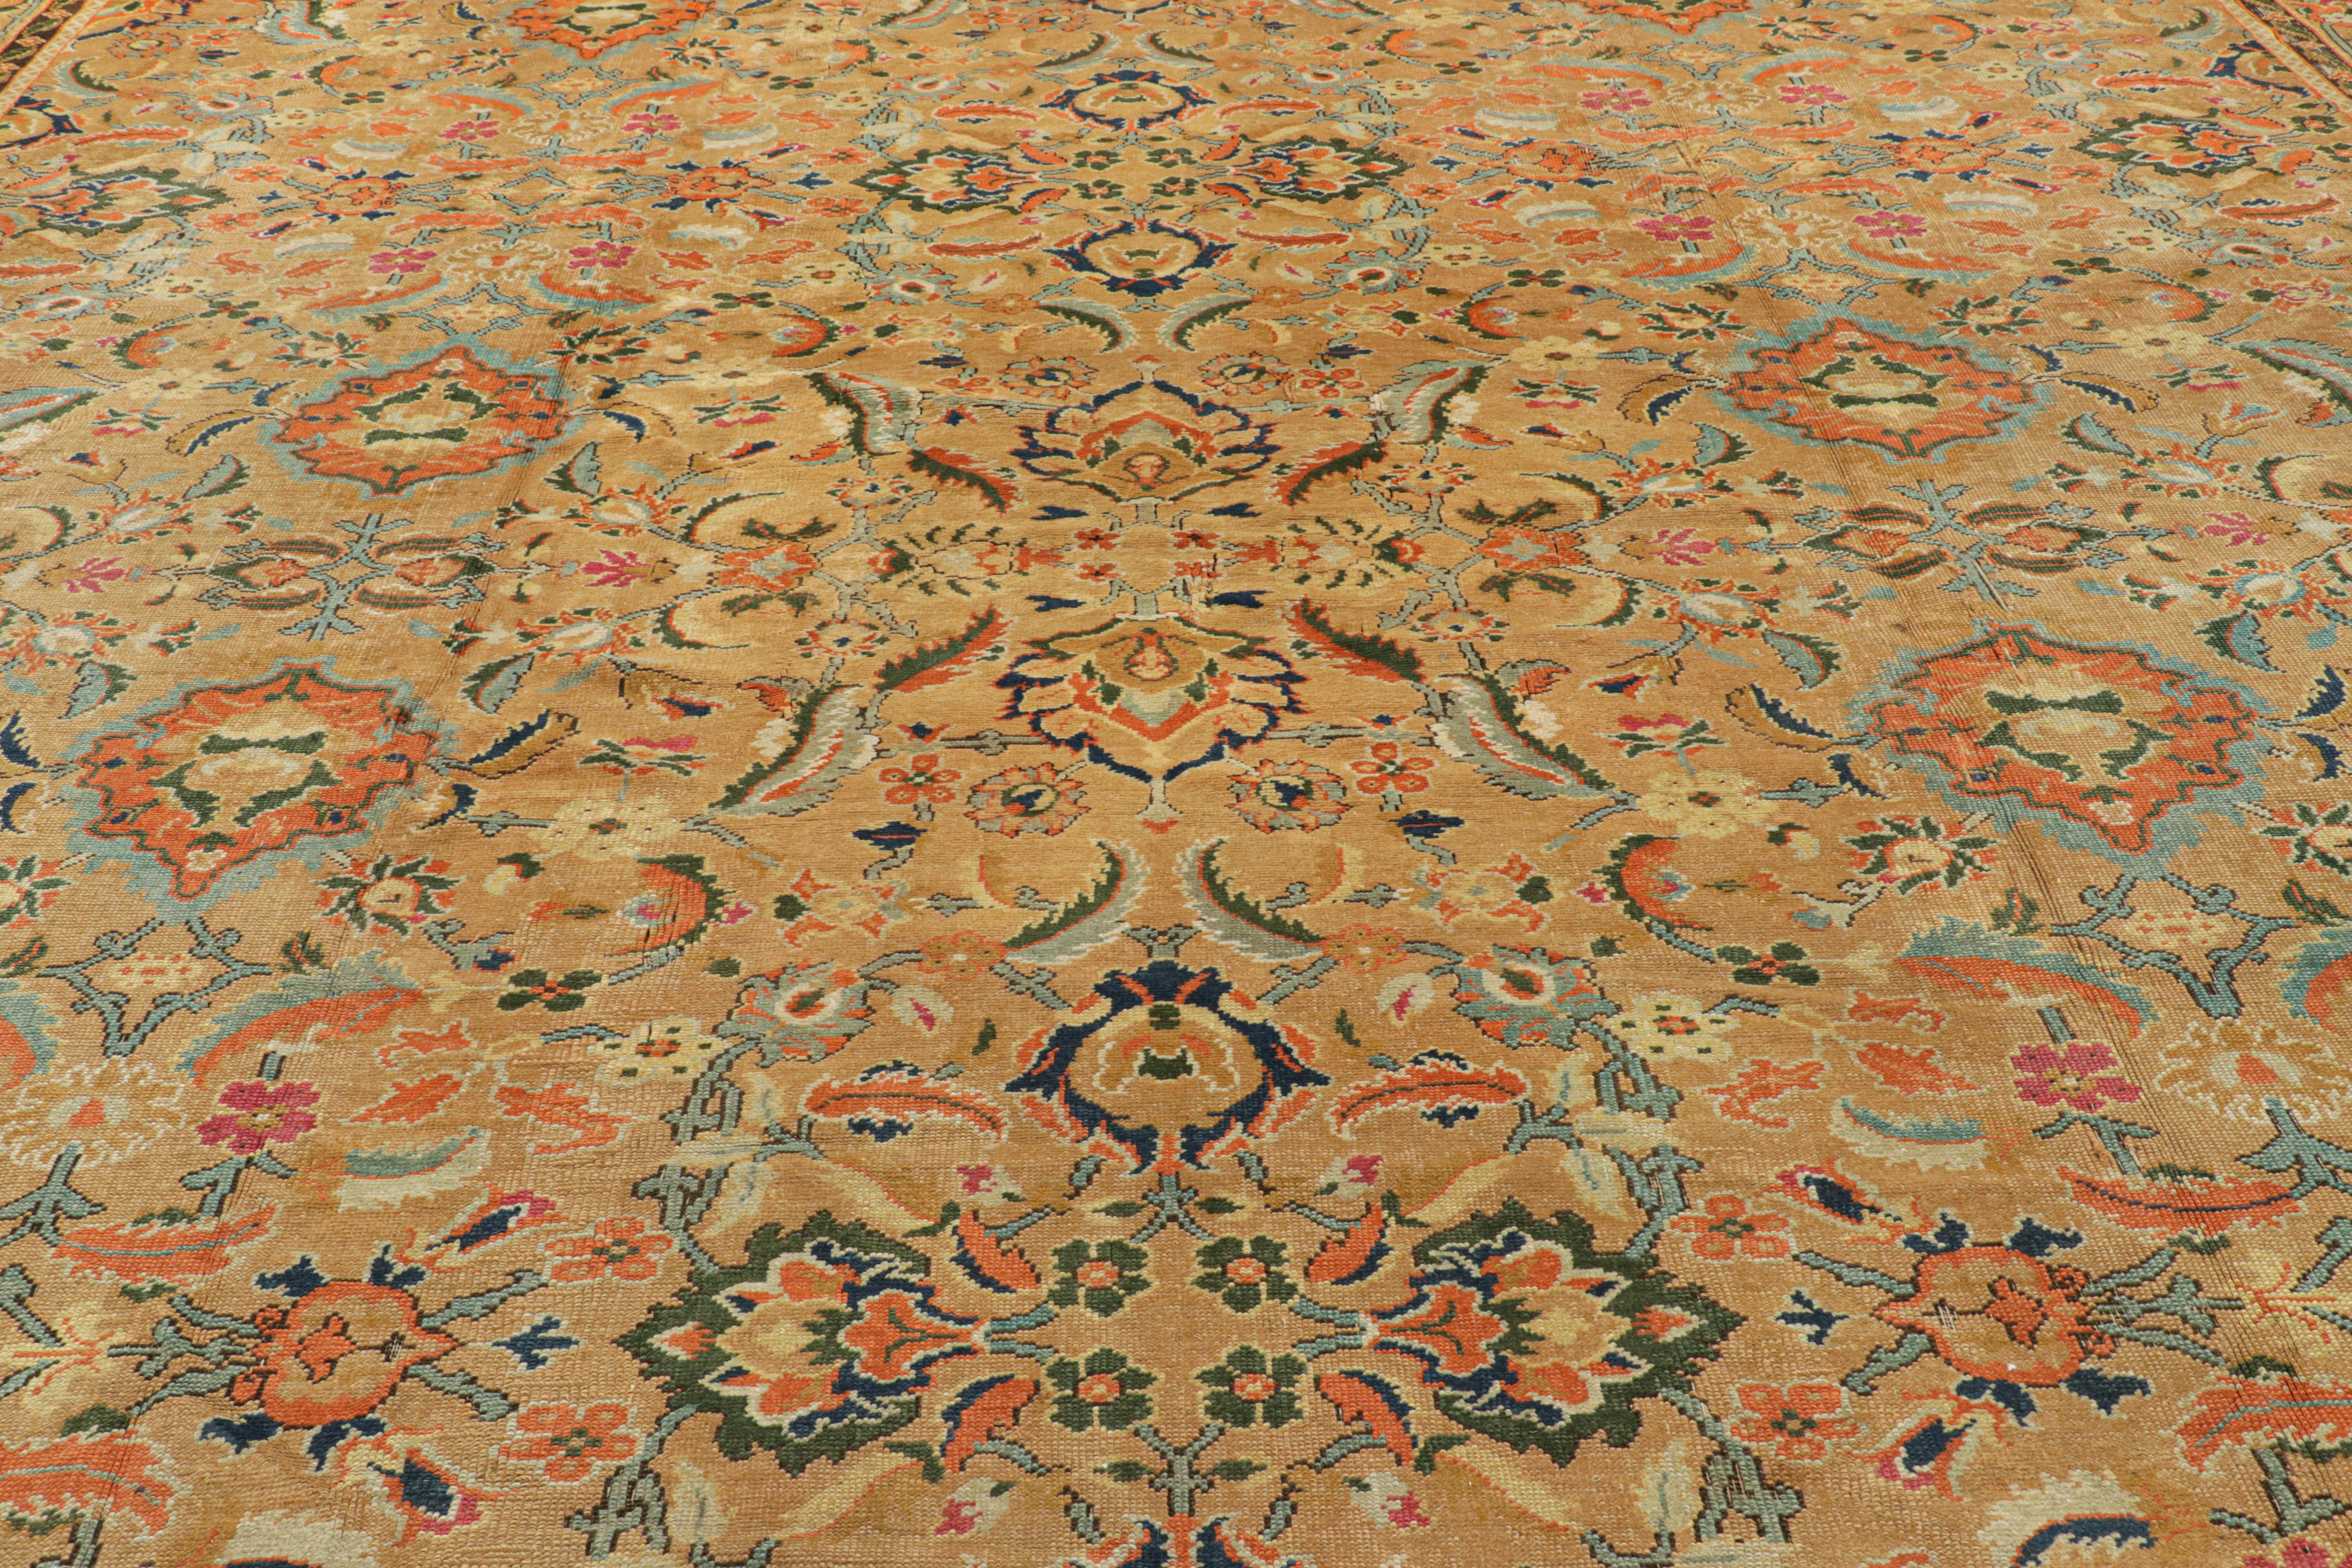 Hand-knotted in wool circa 1850-1860, this 15x26 antique axminster rug is an extremely rare collectible English palace rug—an exciting new oversized addition to our European rug collection. 

On the Design: 

Admirers of the craft will note an